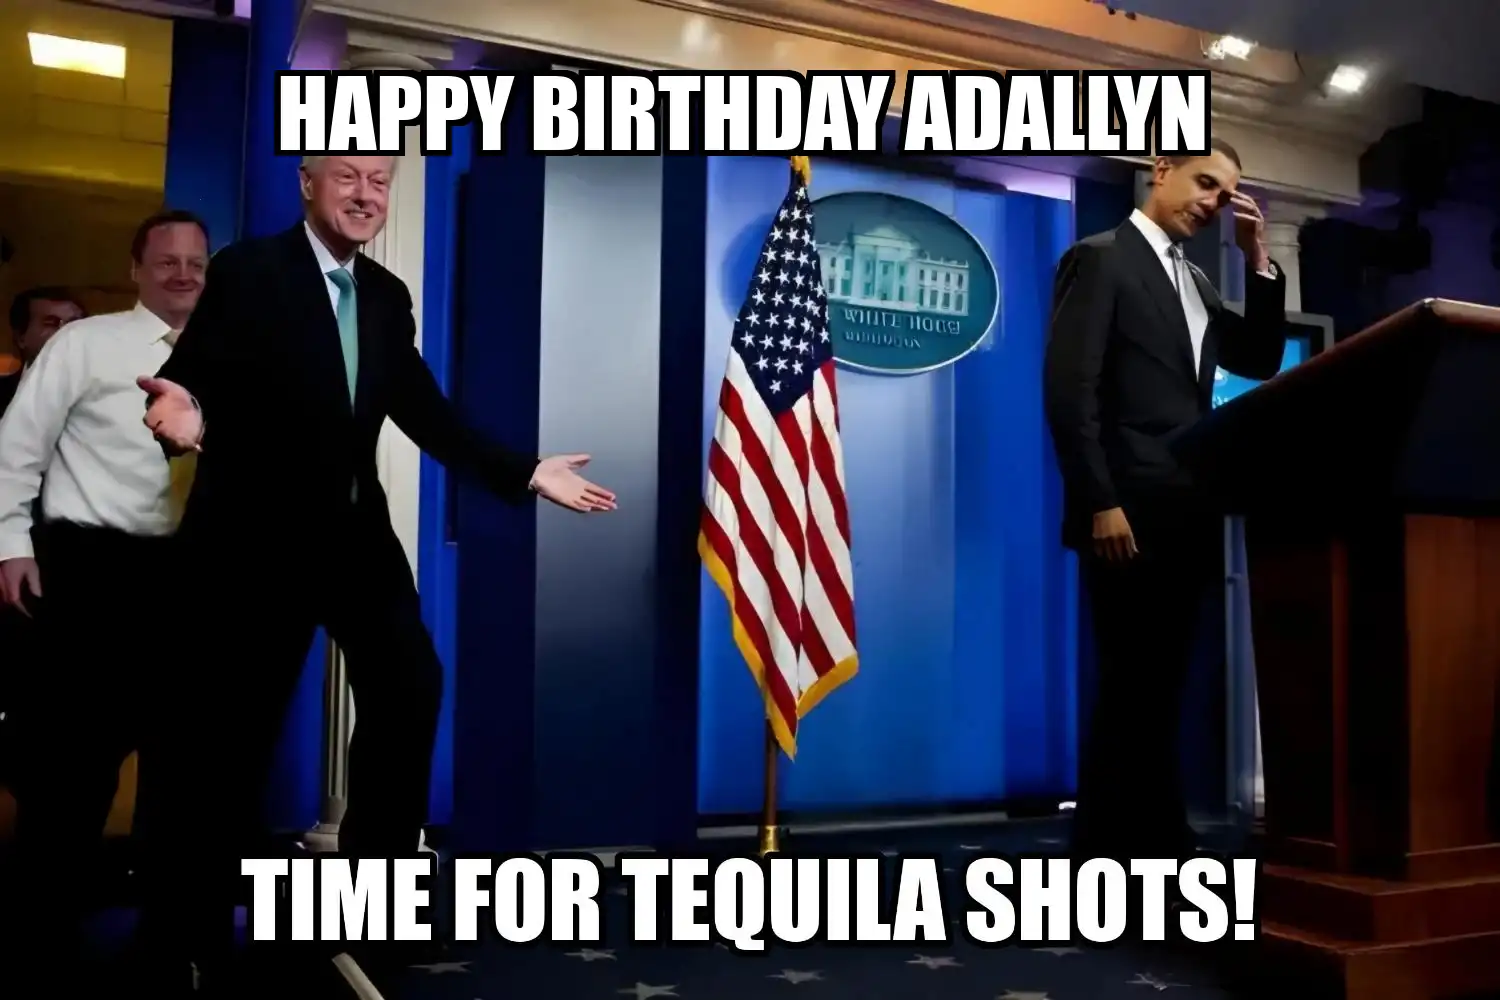 Happy Birthday Adallyn Time For Tequila Shots Memes